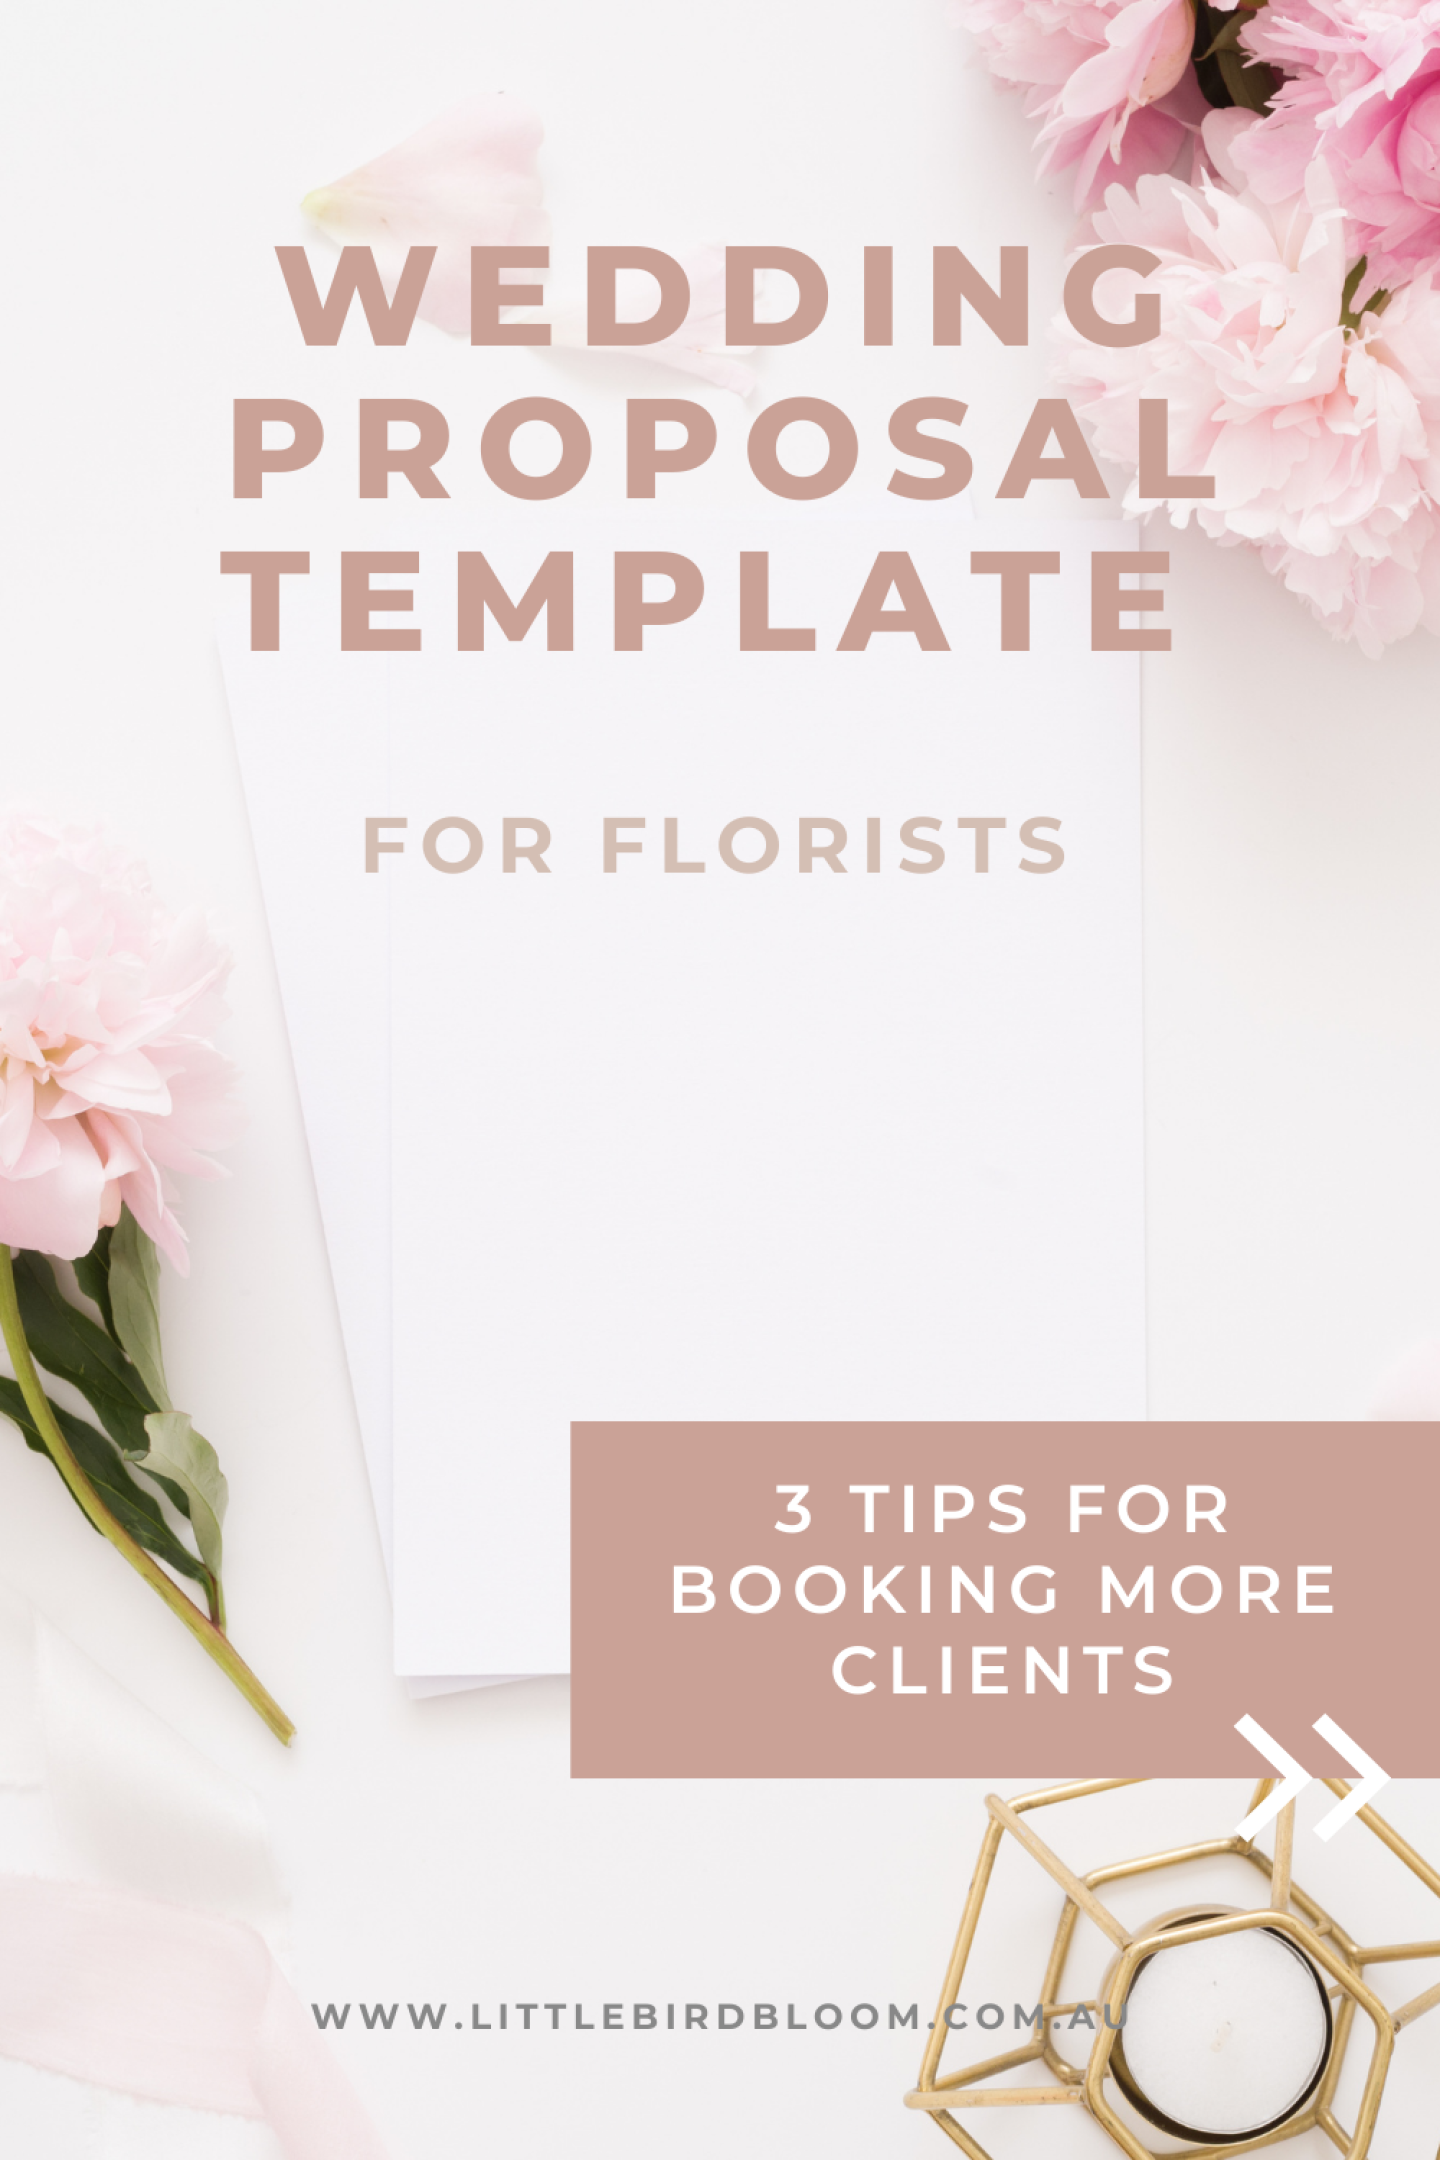 Wedding Proposal Template for Florists